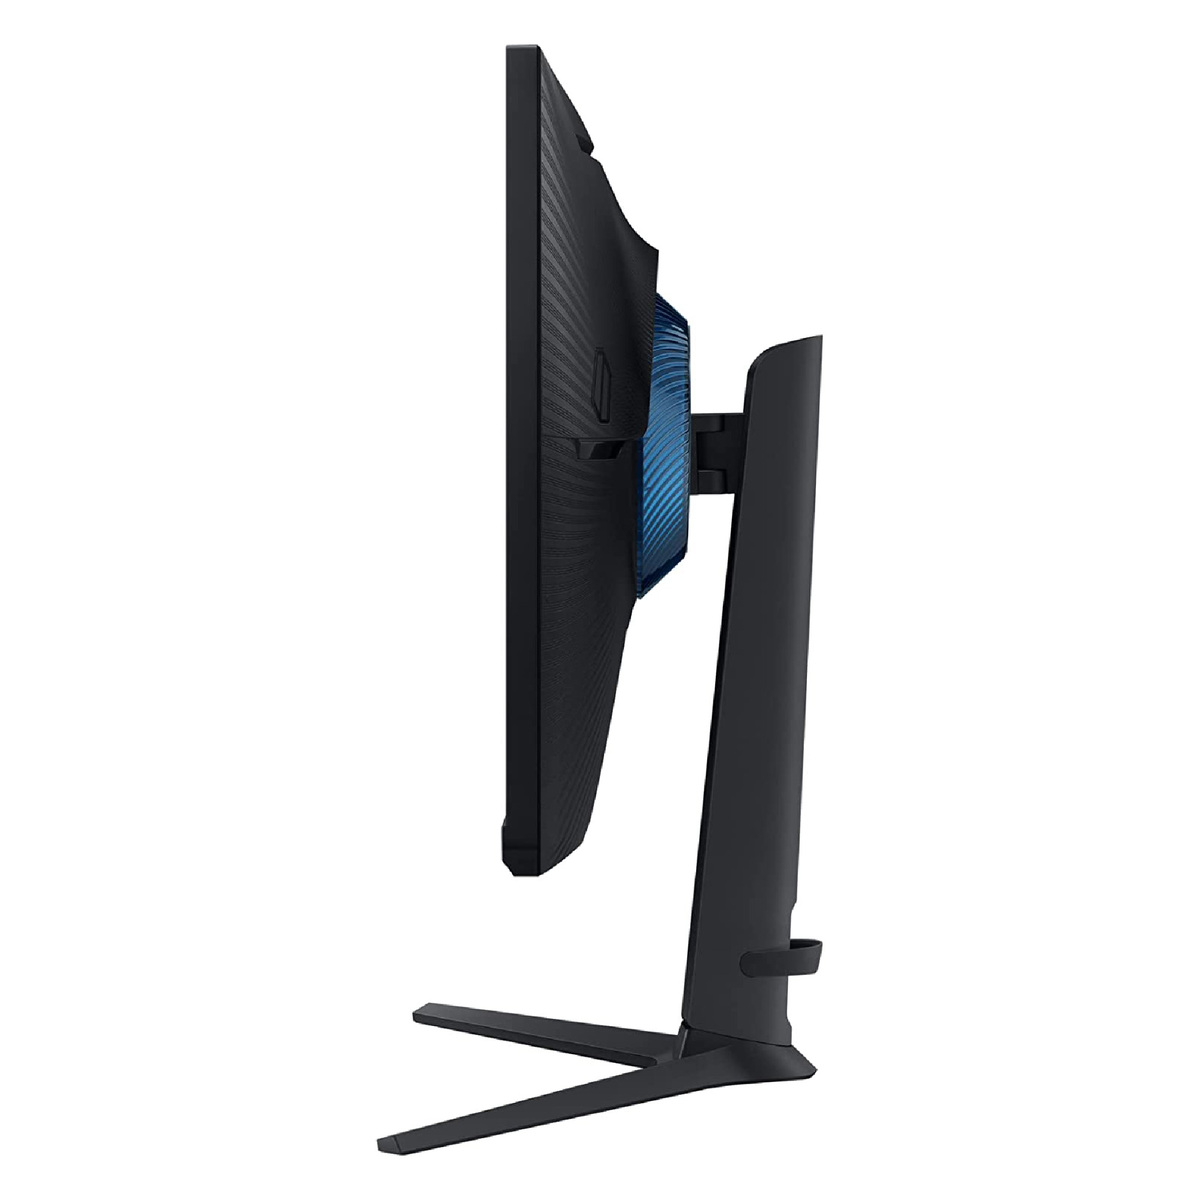 Samsung Odyssey G3 Gaming Monitor AG320 with 165Hz Refresh rate and 1ms Response Time , AMD Free Sync, Ergonomic Design Height Adjustable, Tilt, Swivel and Pivot modes (24" inches)